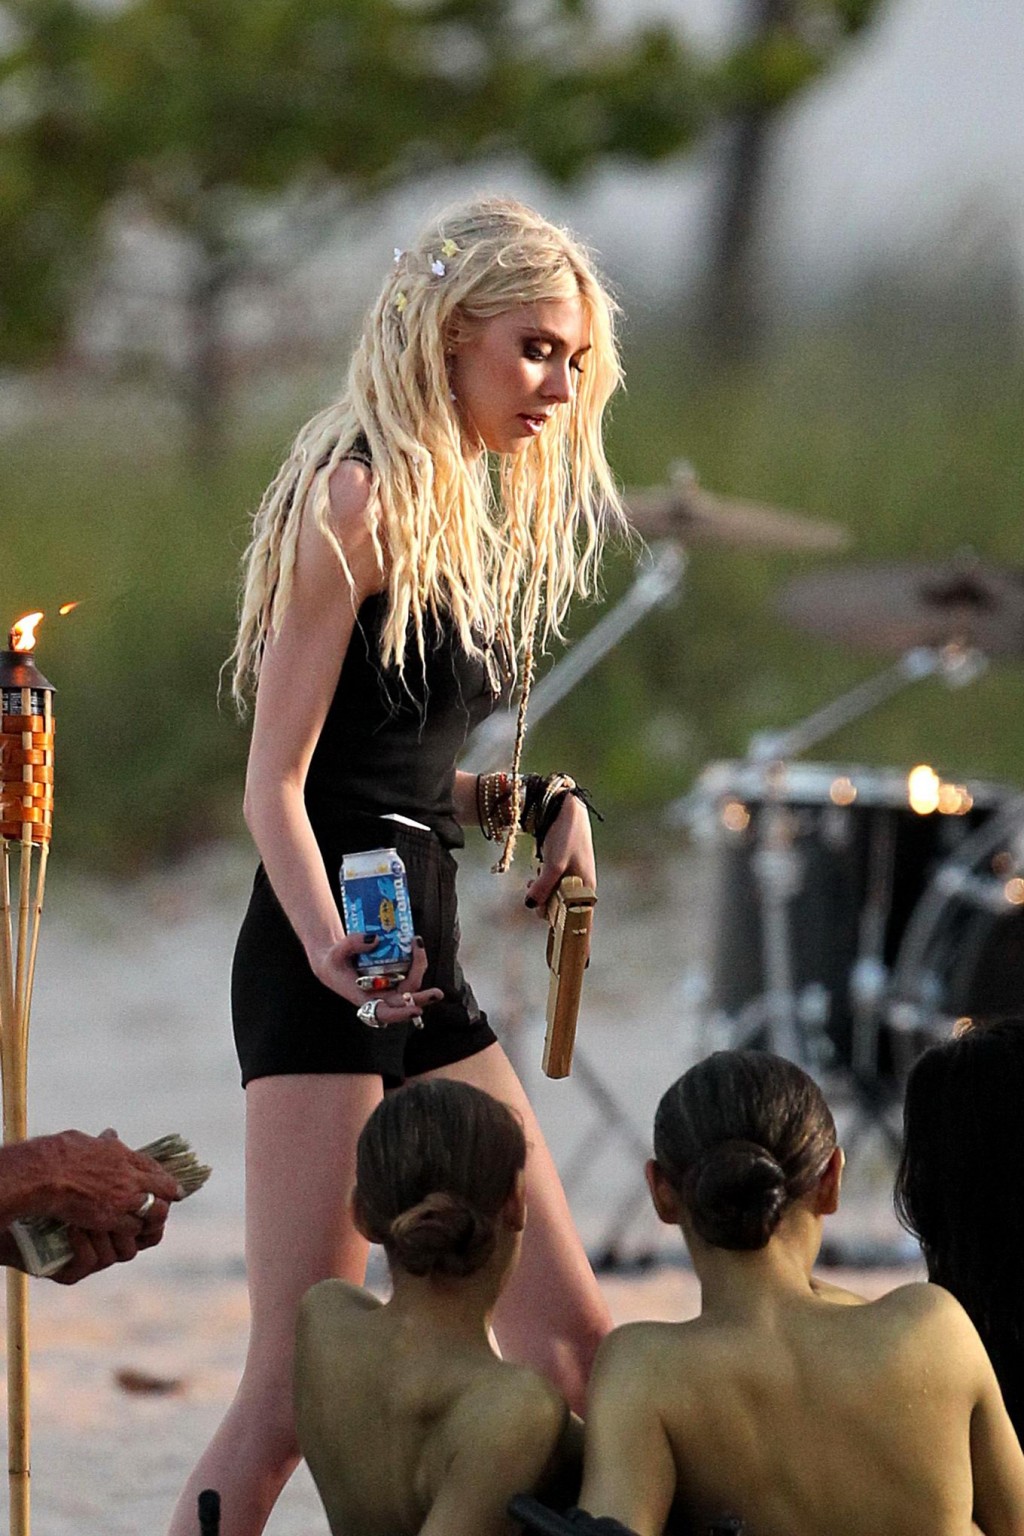 Taylor Momsen shooting a music video on Miami Beach with two bodypainted models #75197571